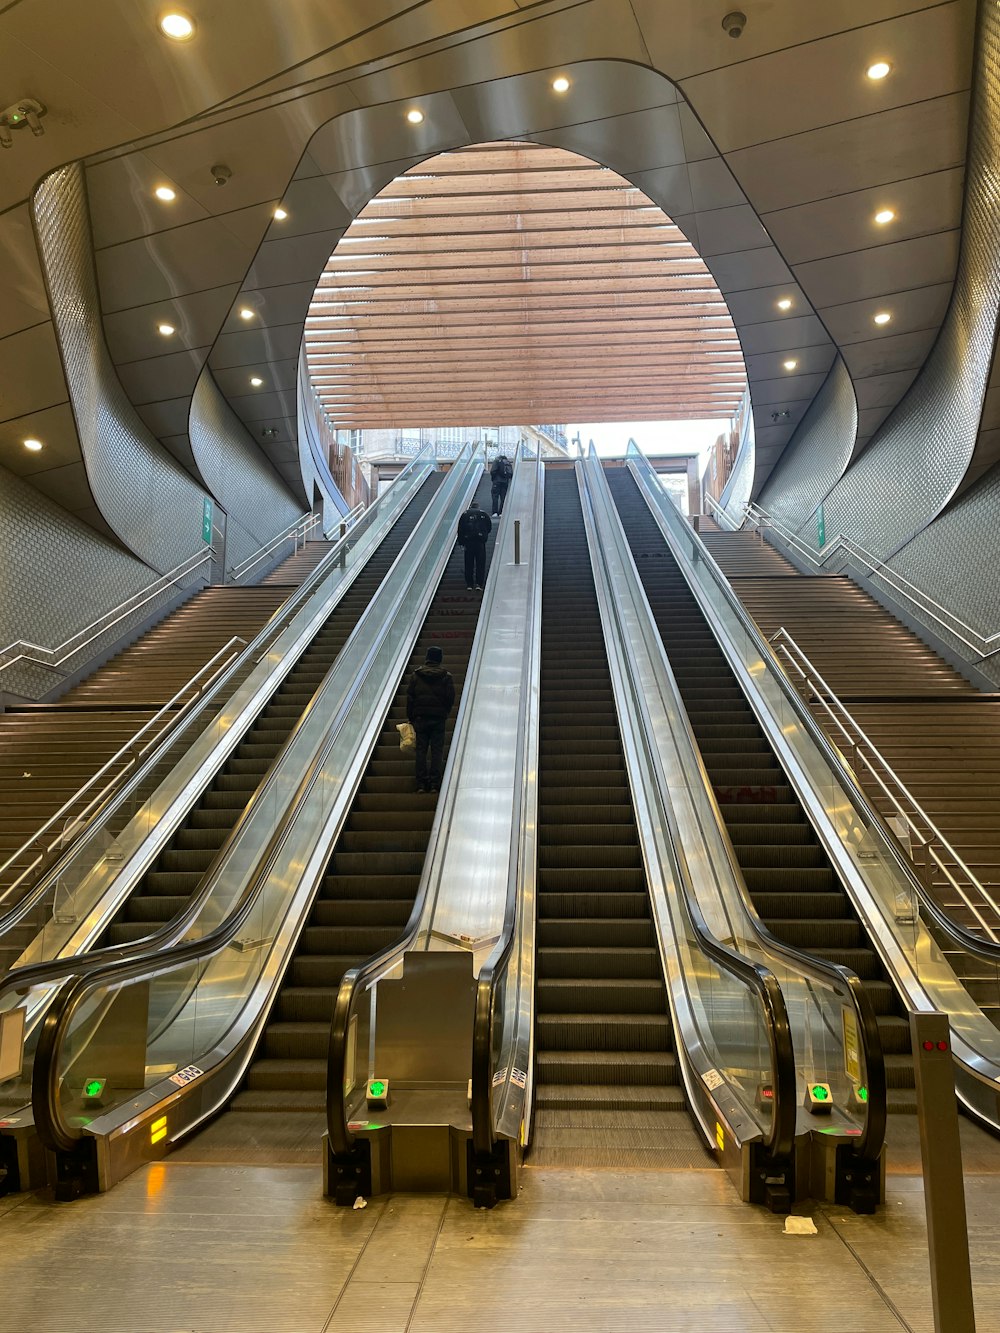 a group of escalators going up and down in a building